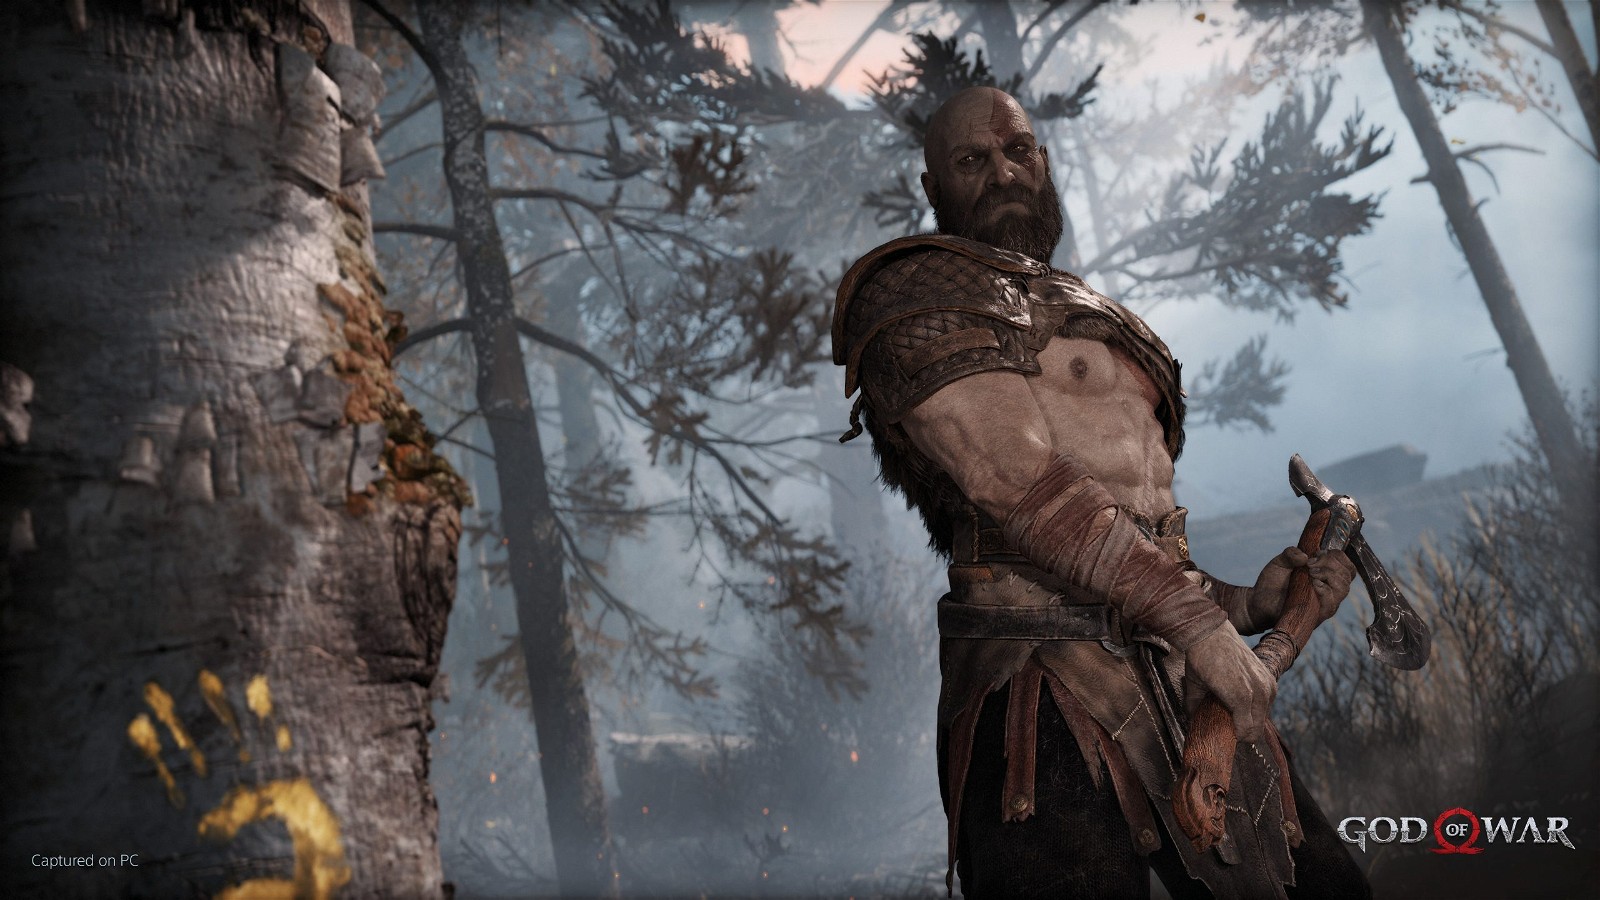 While staying true to the above, Santa Monica Studio's God of War has completely revamped the iconic franchise.